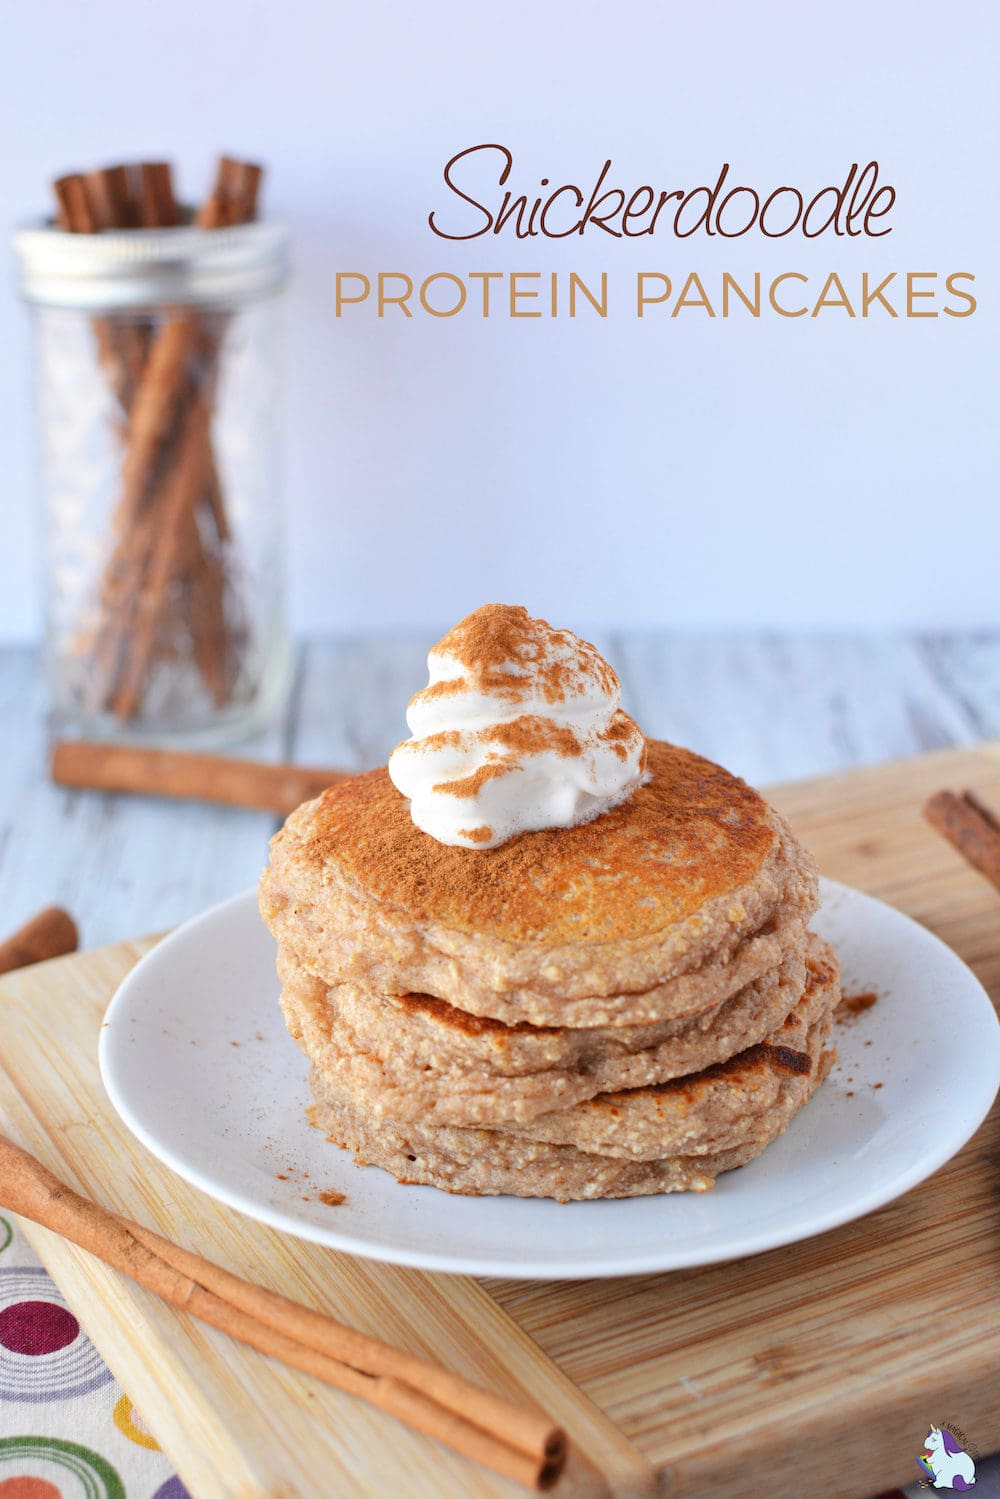 Snickerdoodle protein pancakes with whipped cream and cinnamon on top